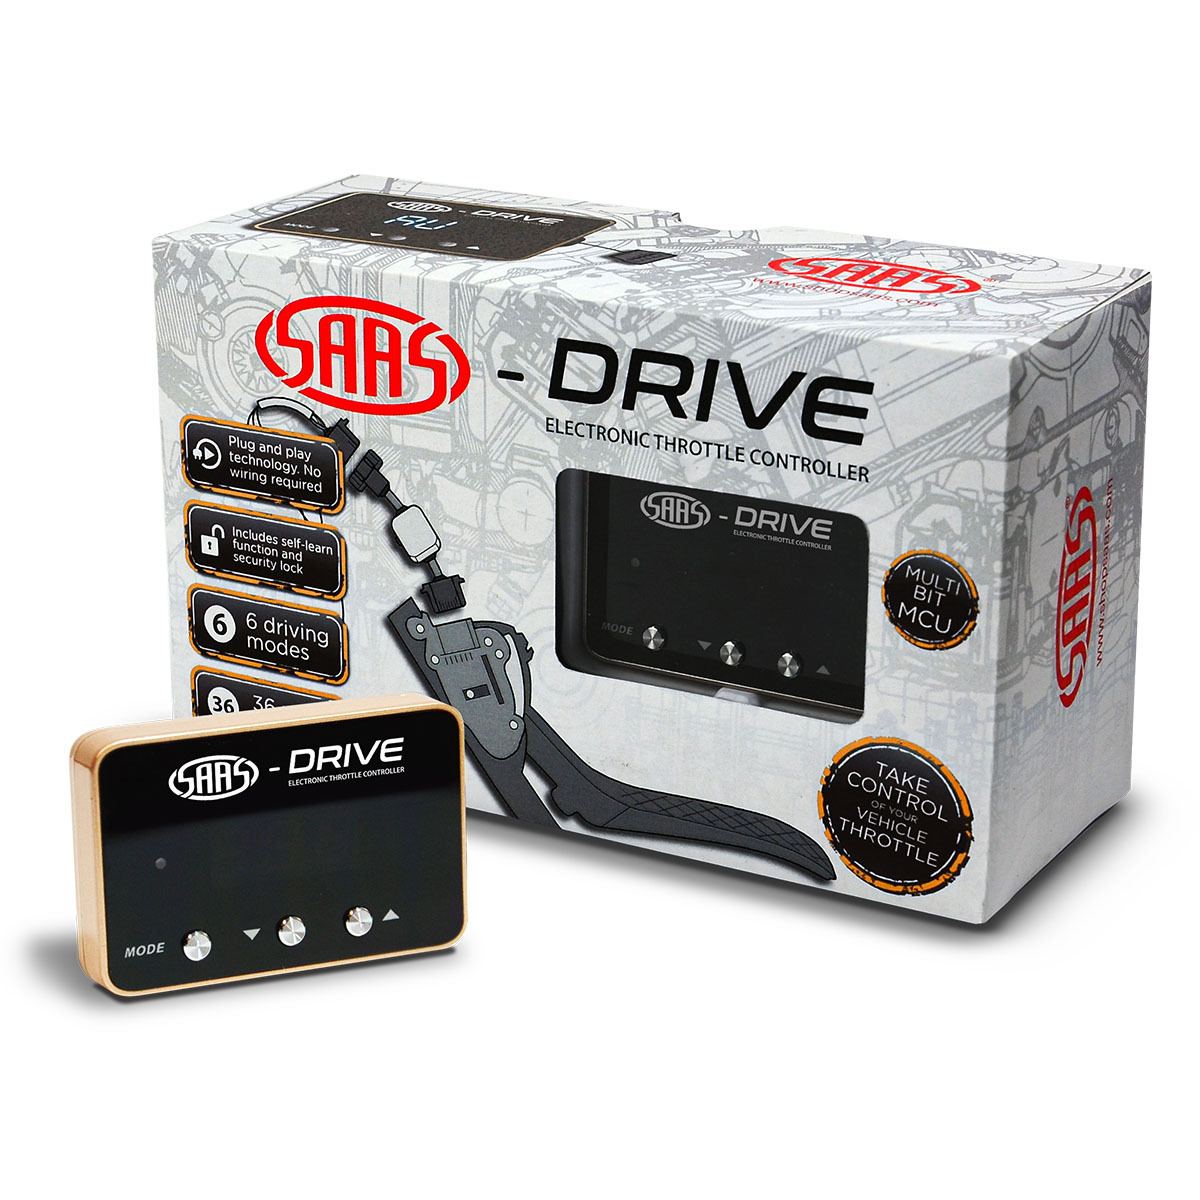 SAAS-Drive Ford Escape 2nd Gen 2008 - 2012 Throttle Controller 